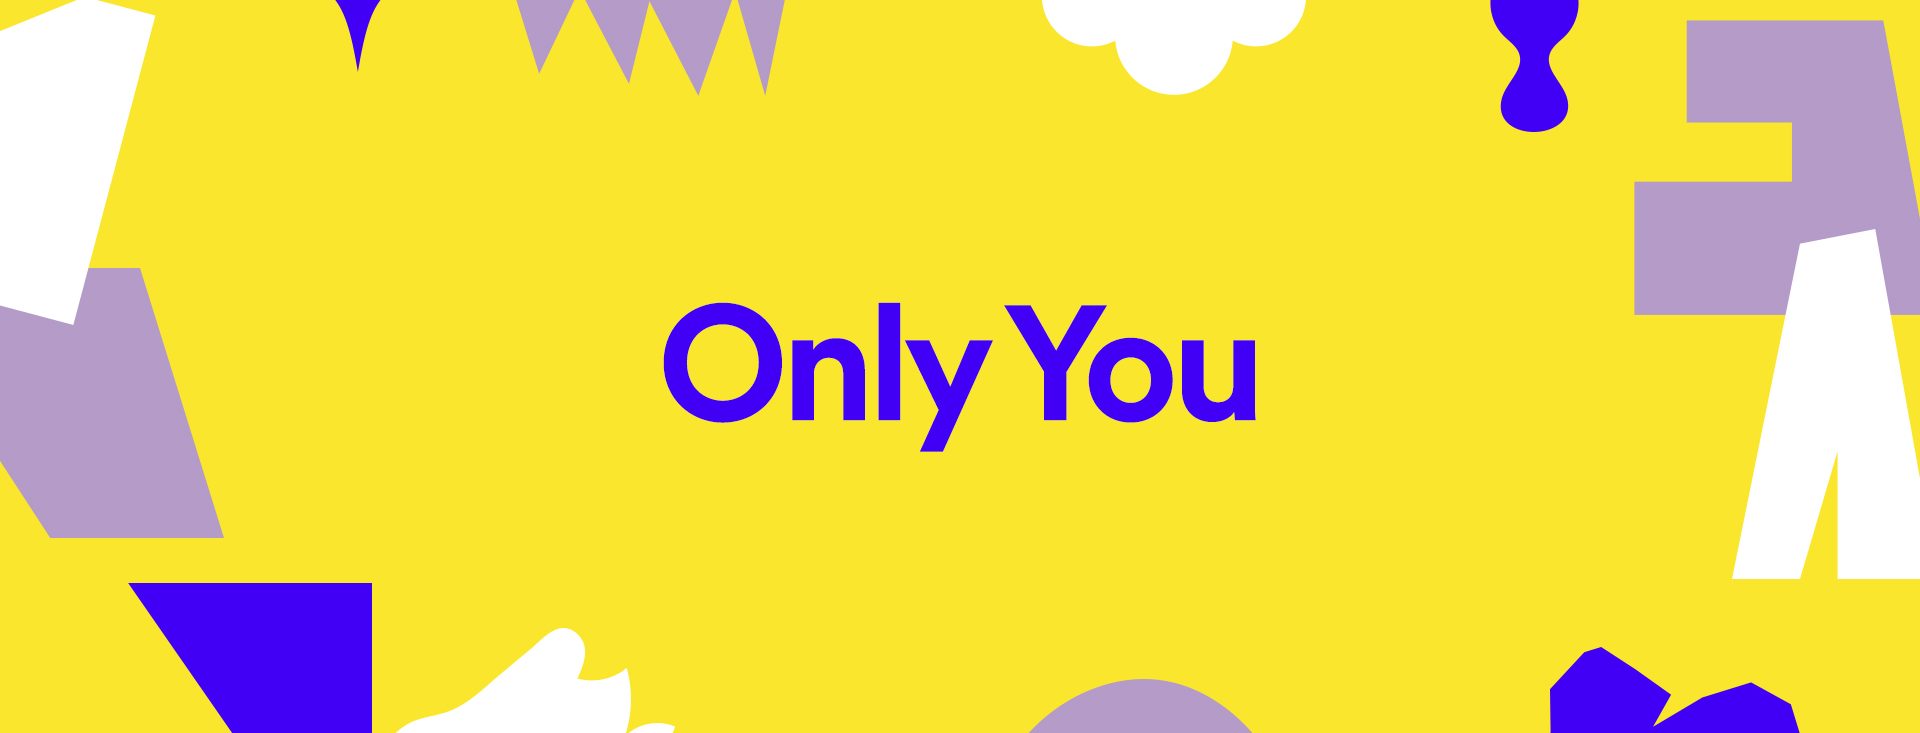 Spotify’s ‘Only You’ experience shows you why your music taste is like no other